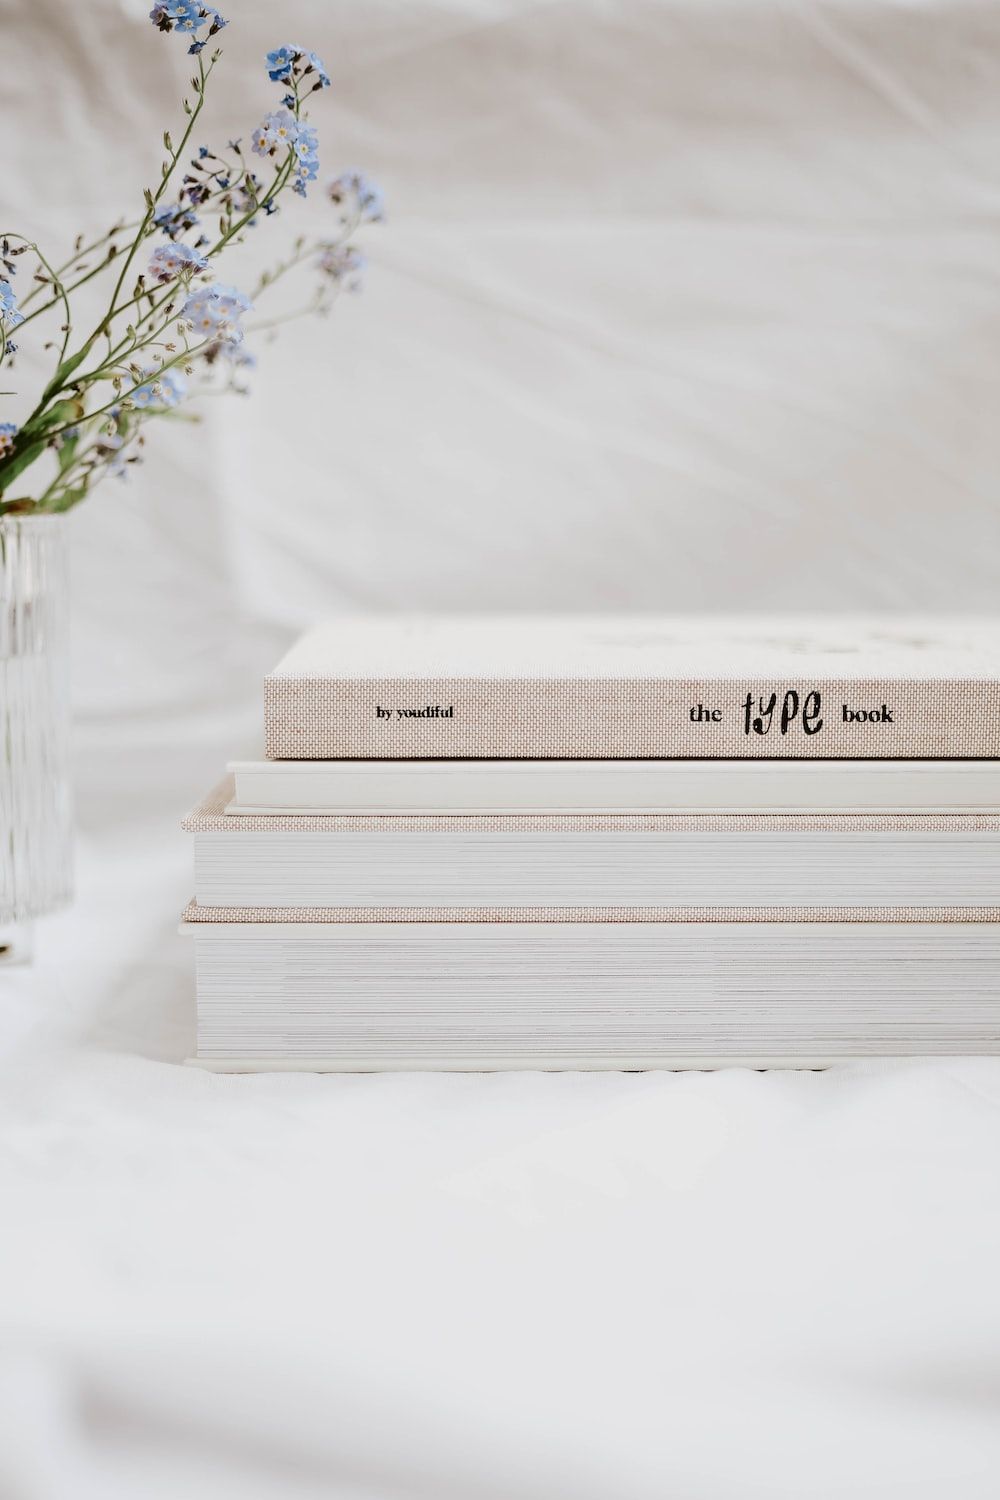 A stack of white books with a vase of flowers on a white sheet. - Books